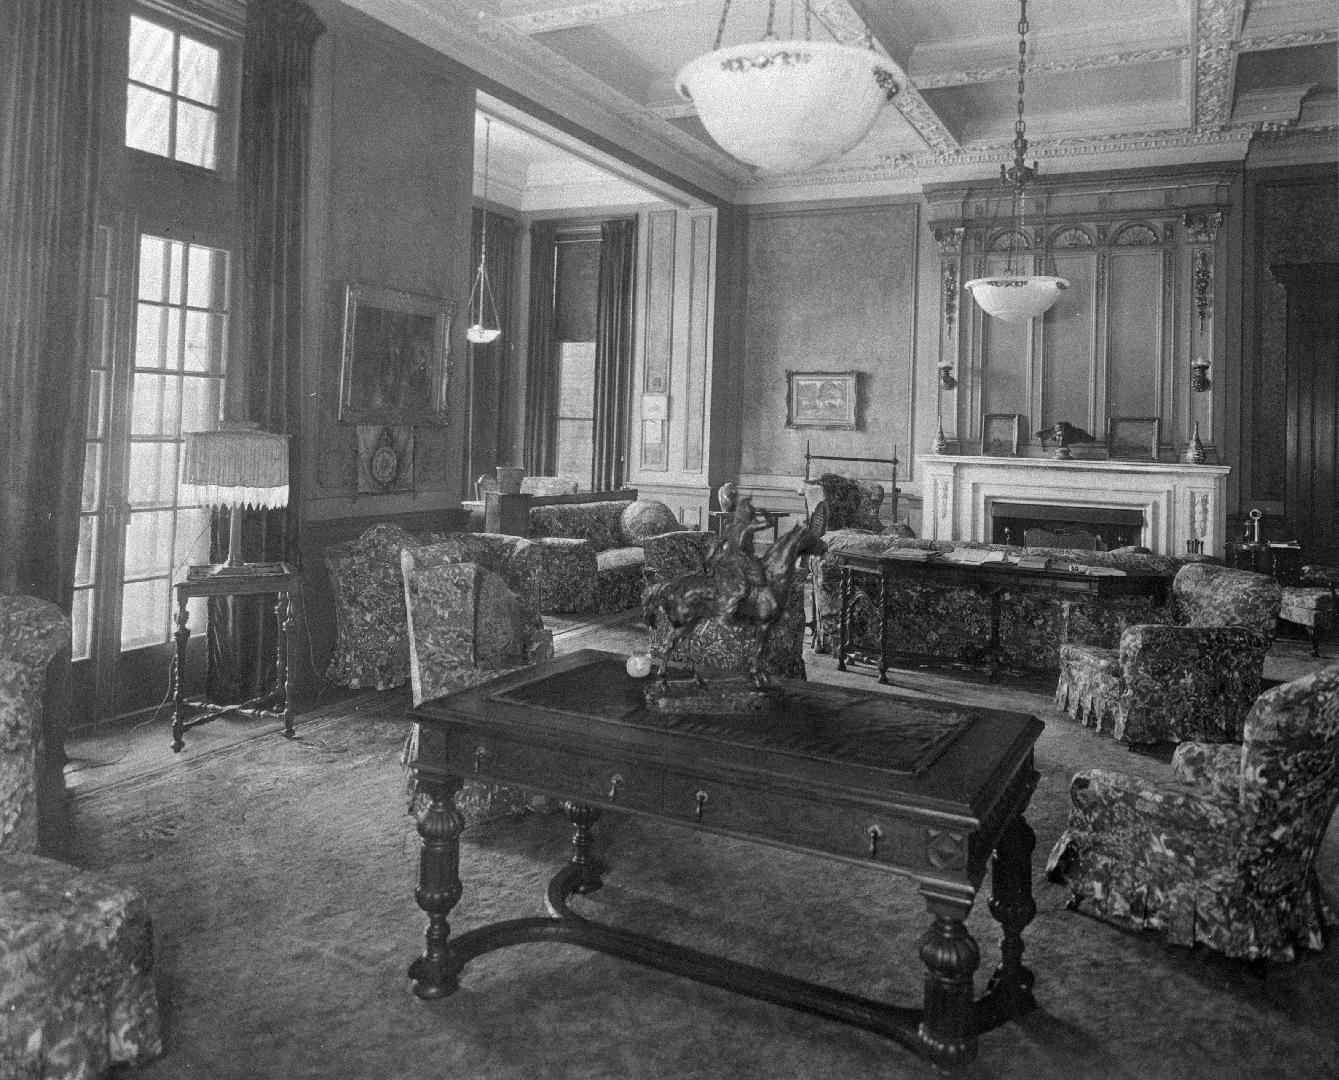 Image shows an interior of a morning room.